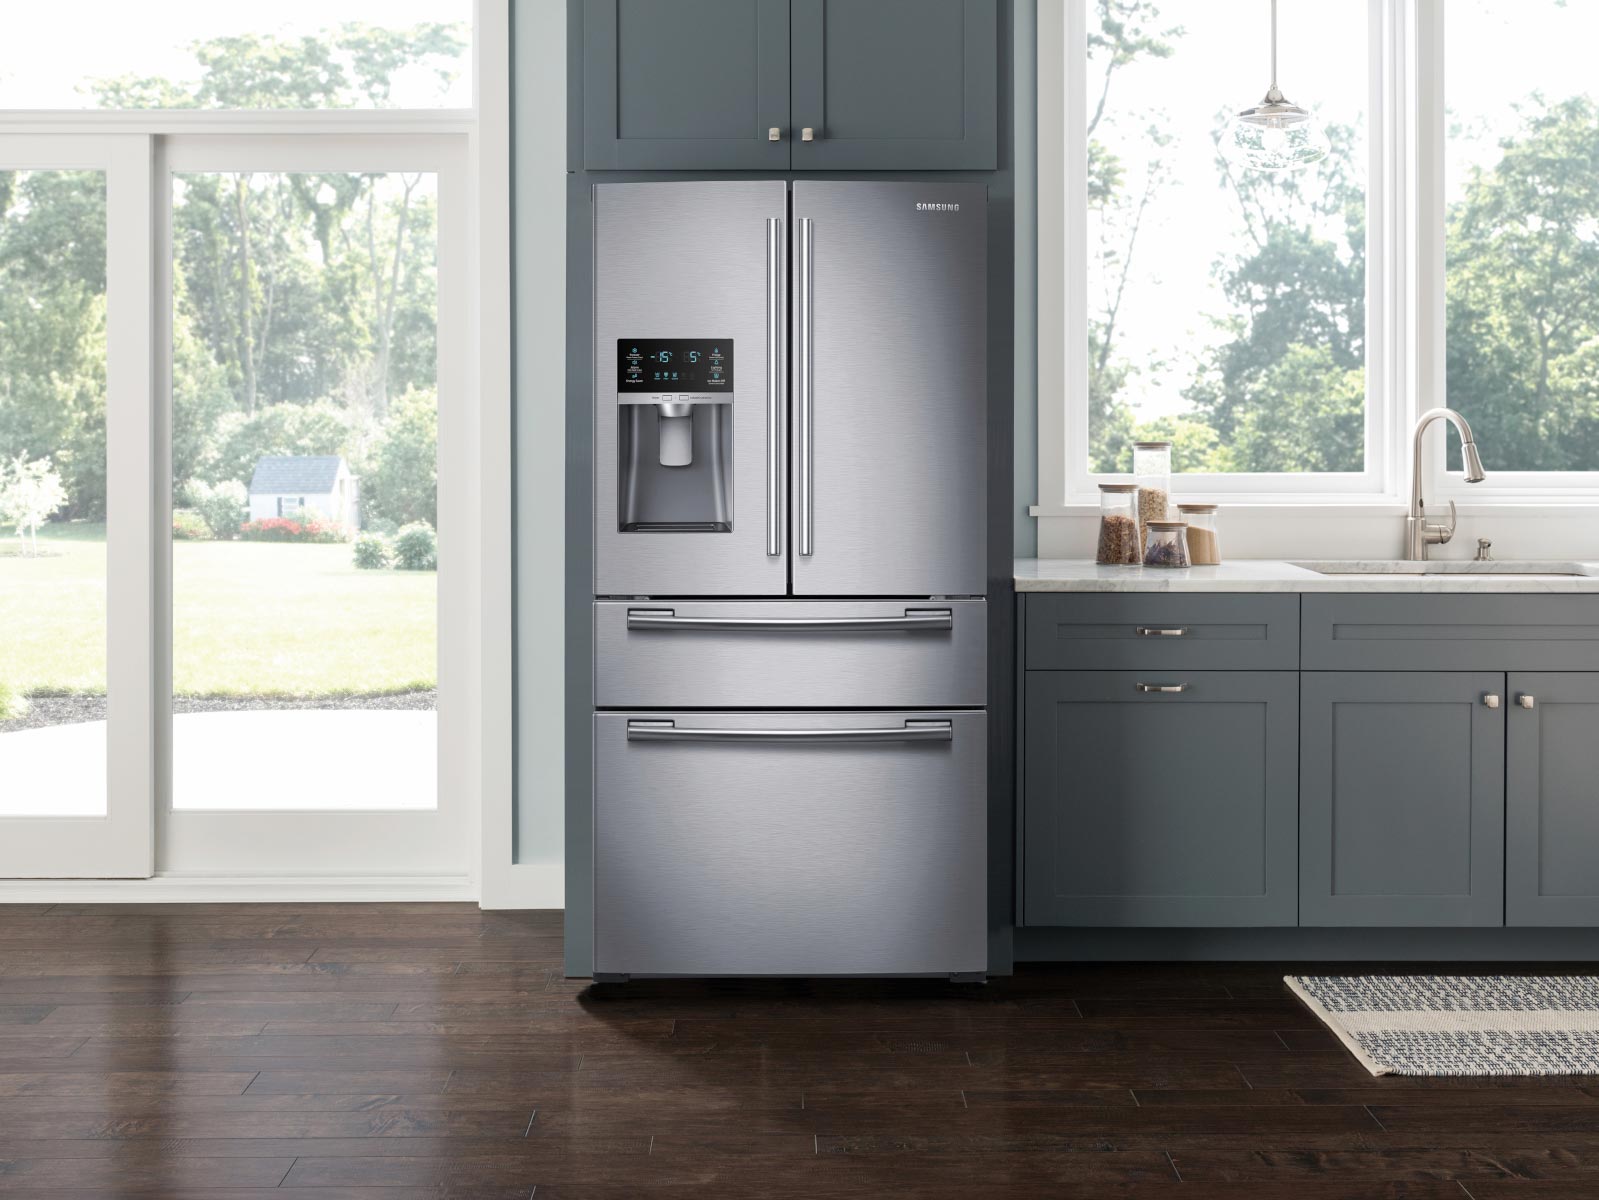 https://image-us.samsung.com/SamsungUS/home/home-appliances/refrigerators/french-doors/pdp/rf25hmedbsr/102417-new/09_Refrigerator_French-Door_RF25HMEDBSR_Lifestyle_Wide_Closed_Silver.jpg?$product-details-jpg$